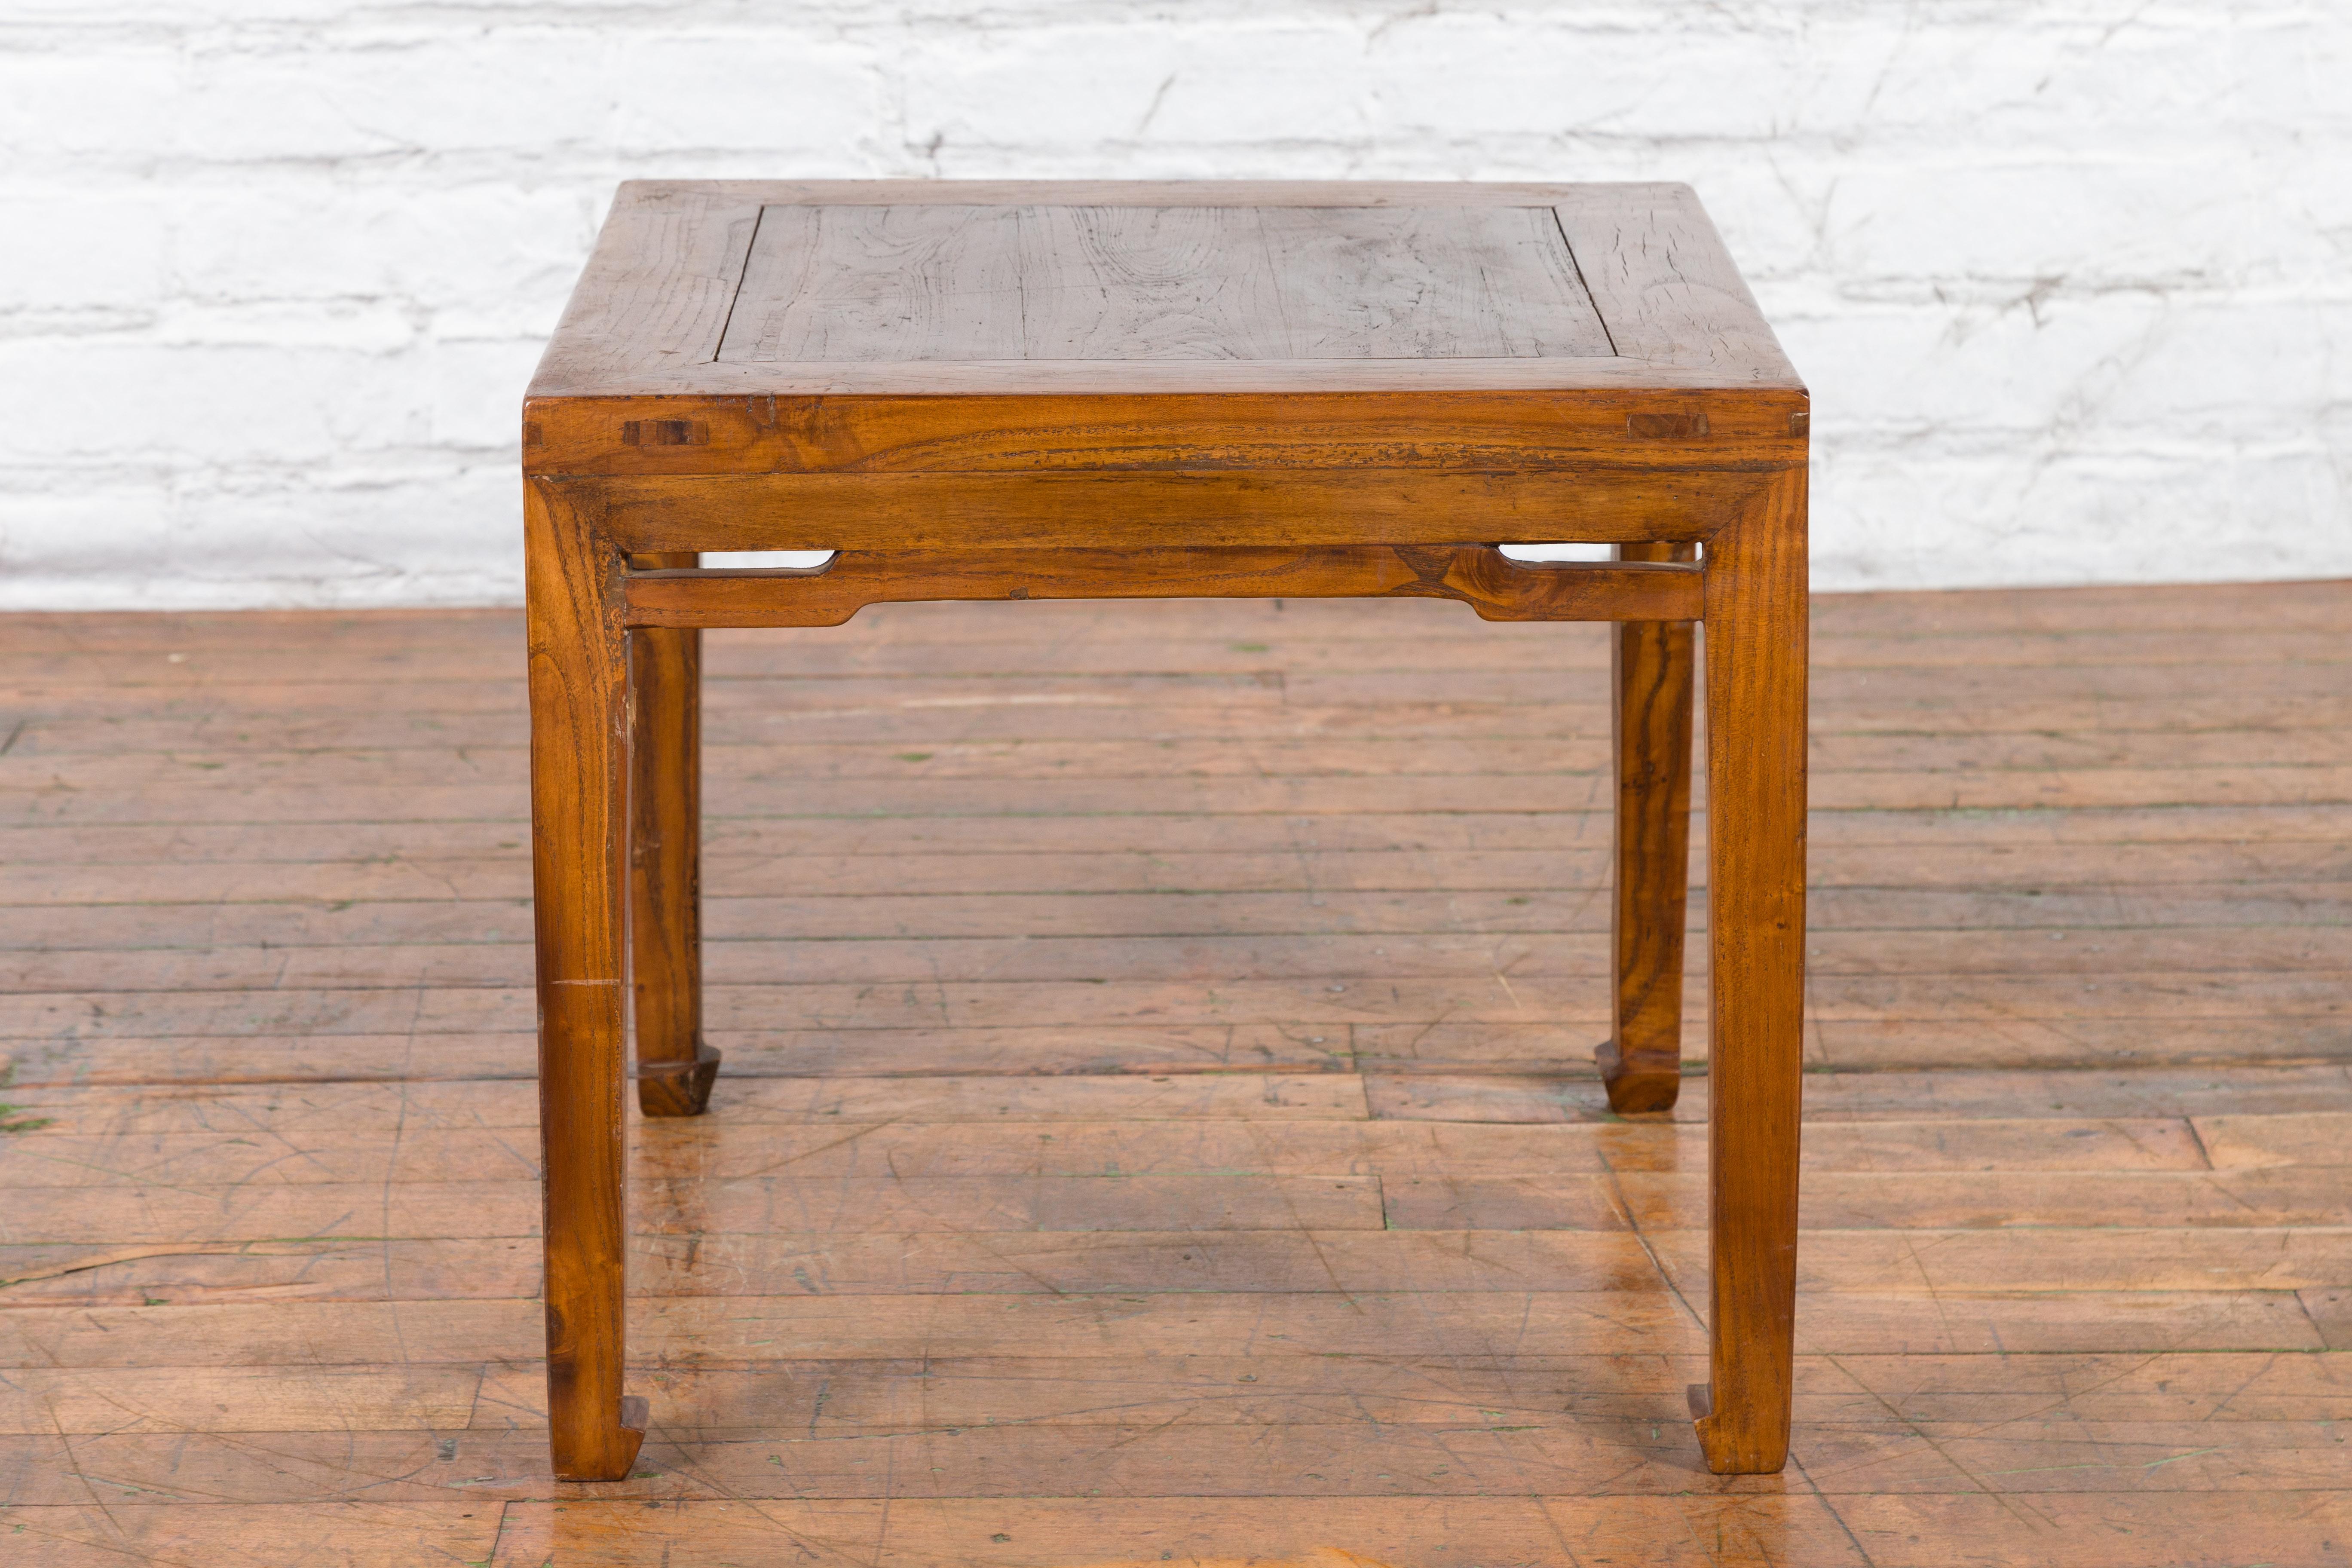 An antique Chinese coffee table from the early 20th century with humpback stretchers and horse hoof extremities. Created in China during the early years of the 20th century, this small coffee table features a square top with central board, sitting